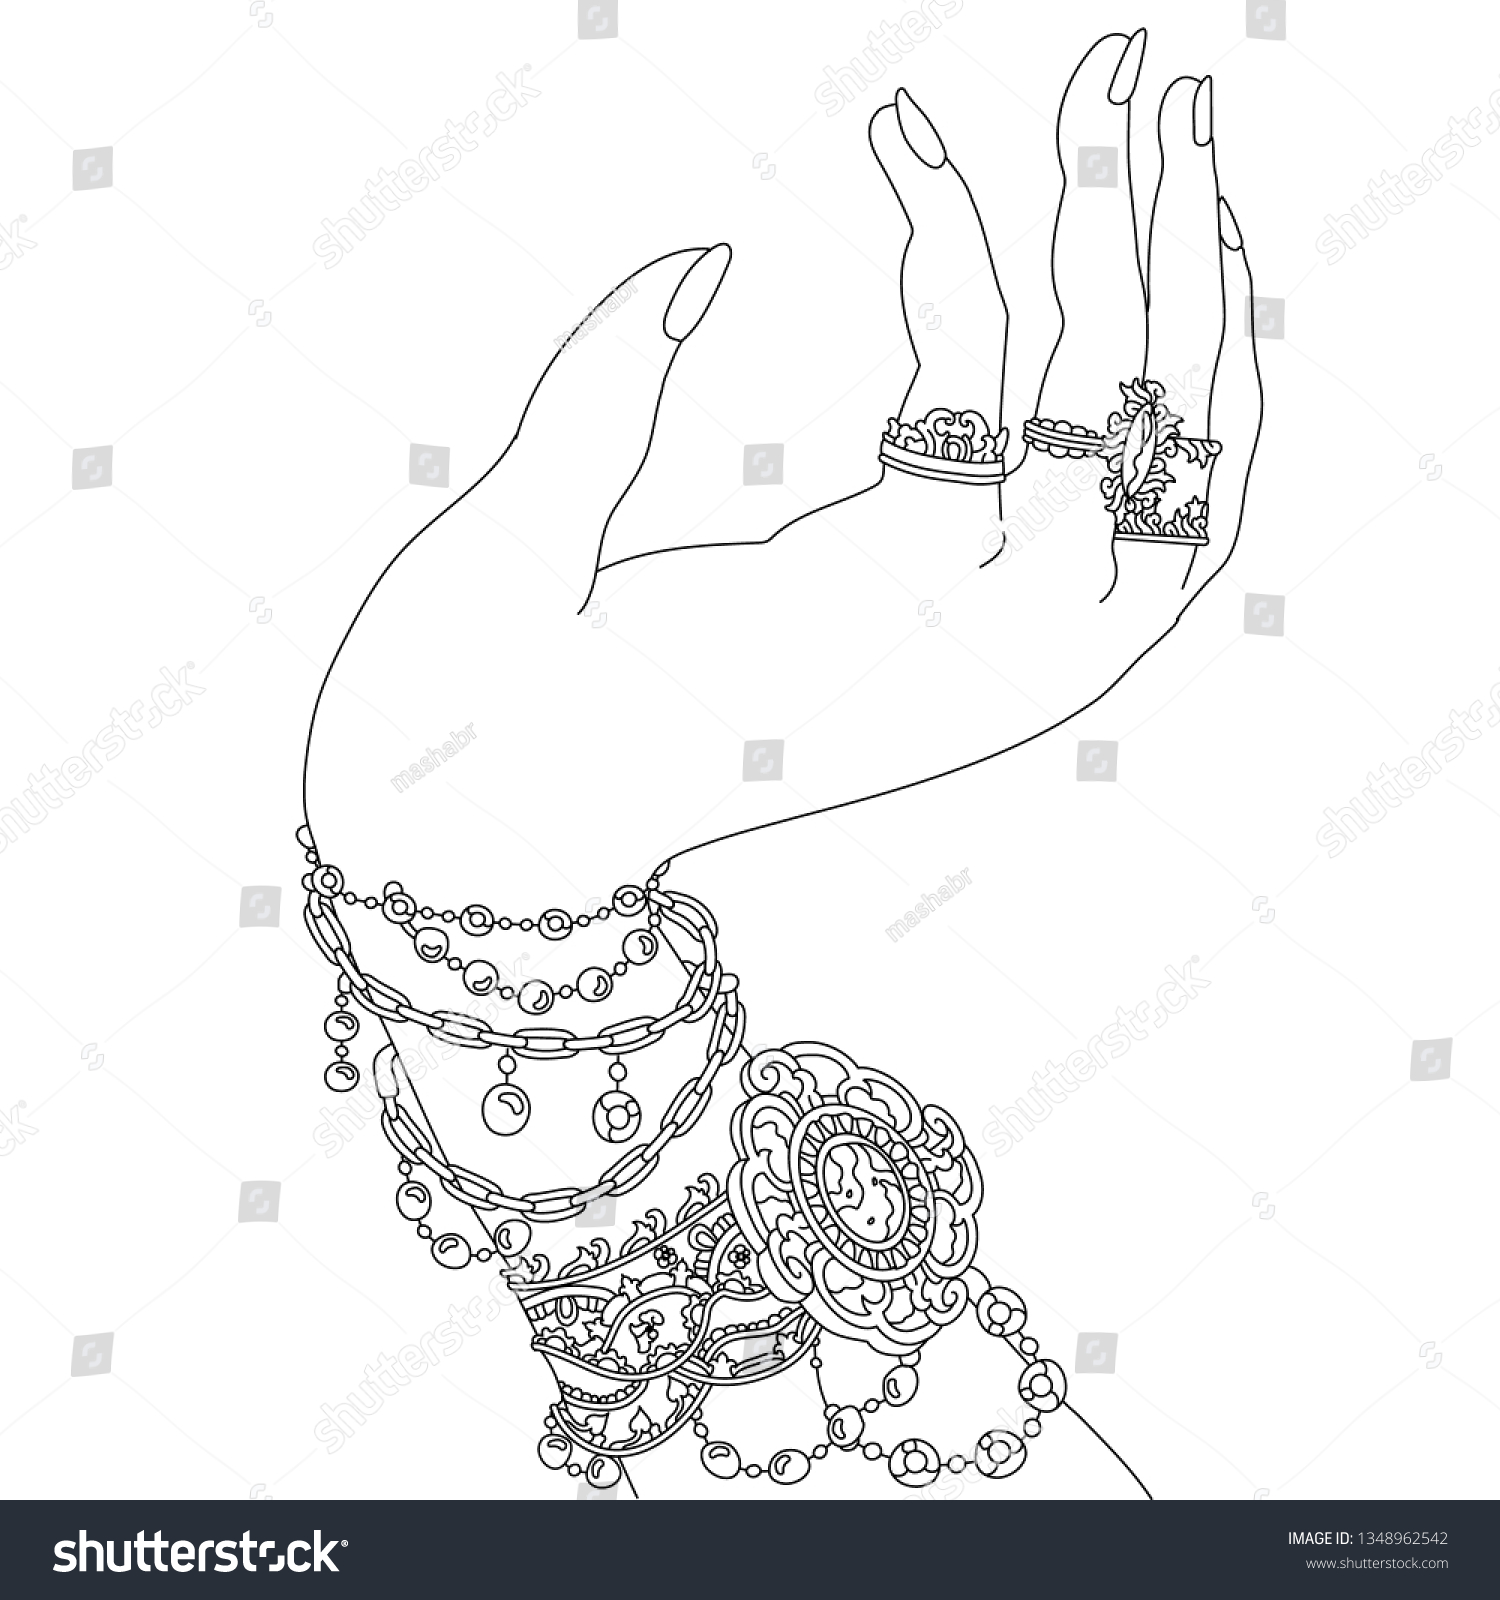 4,982 Jewelry coloring book Images, Stock Photos & Vectors | Shutterstock